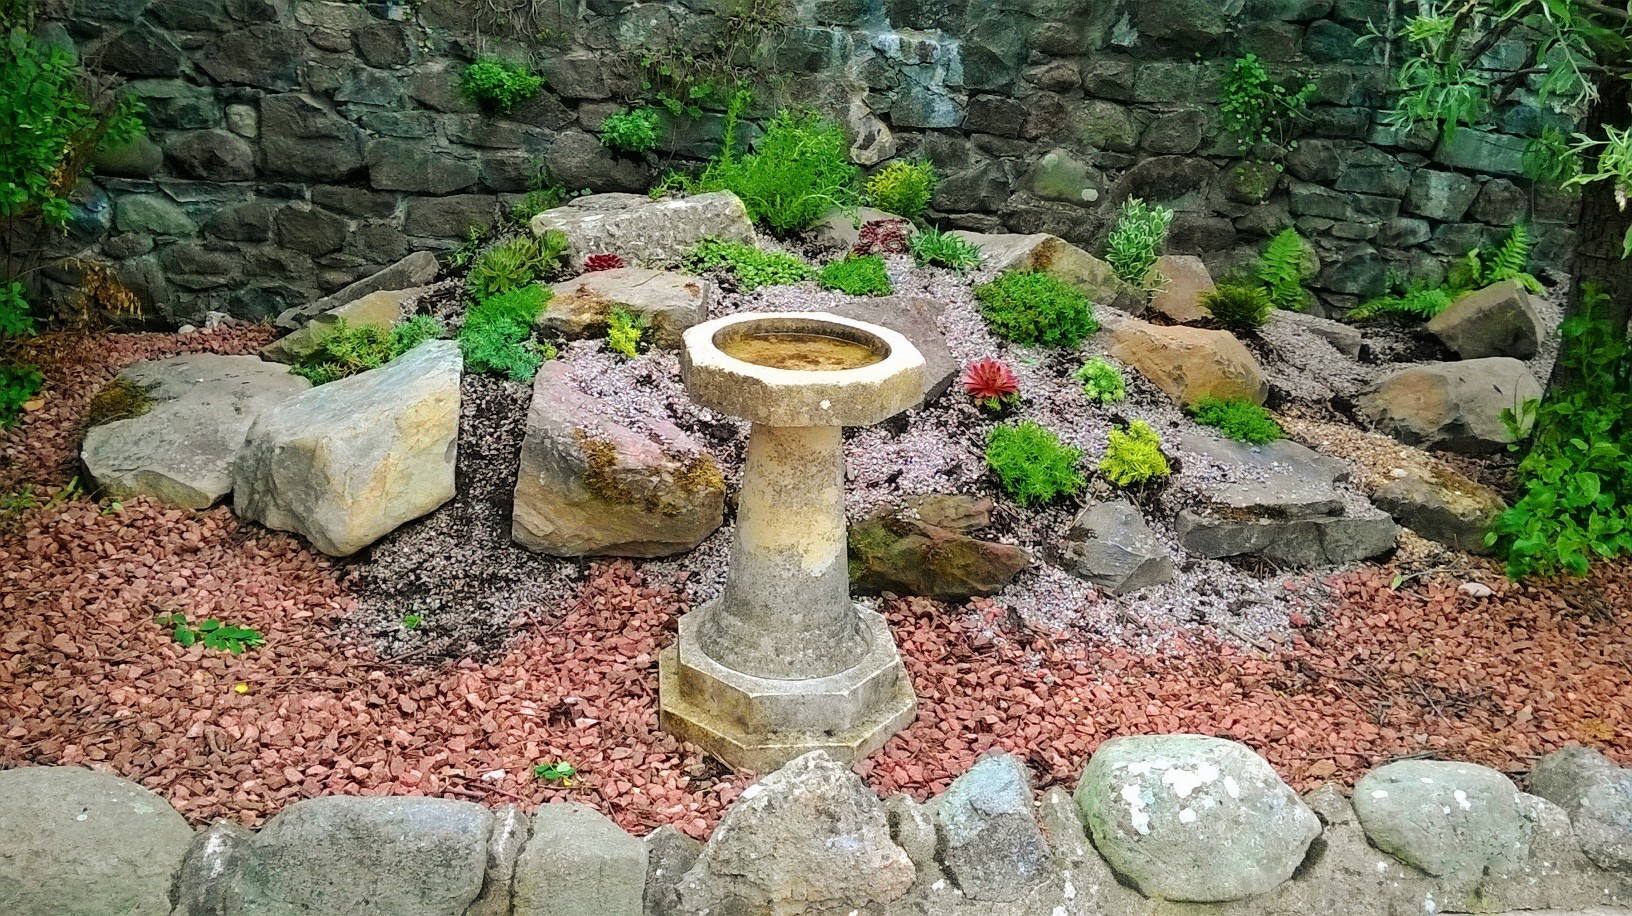 Antique stone bird bath in a happy customers garden. Genuine reclaimed stone bird baths are ideal to you in traditional period gardens